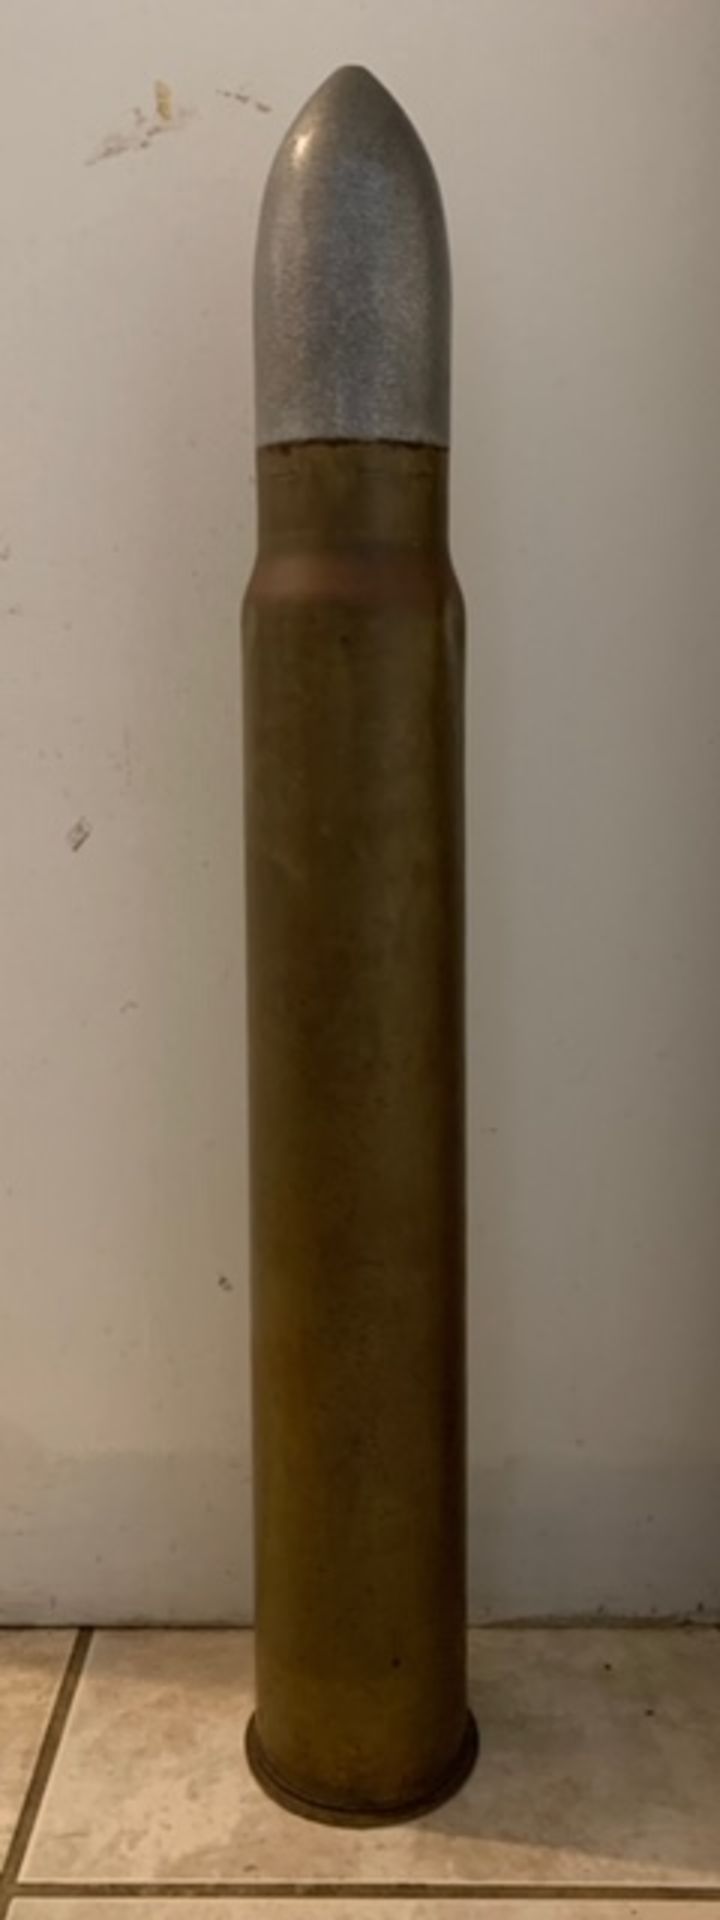 VINTAGE WW2 TRAINING ARTILLERY SHELL - MK7 MOD1 - 50 CALIBER DATED 4-1943 - US NAVY STAMPED